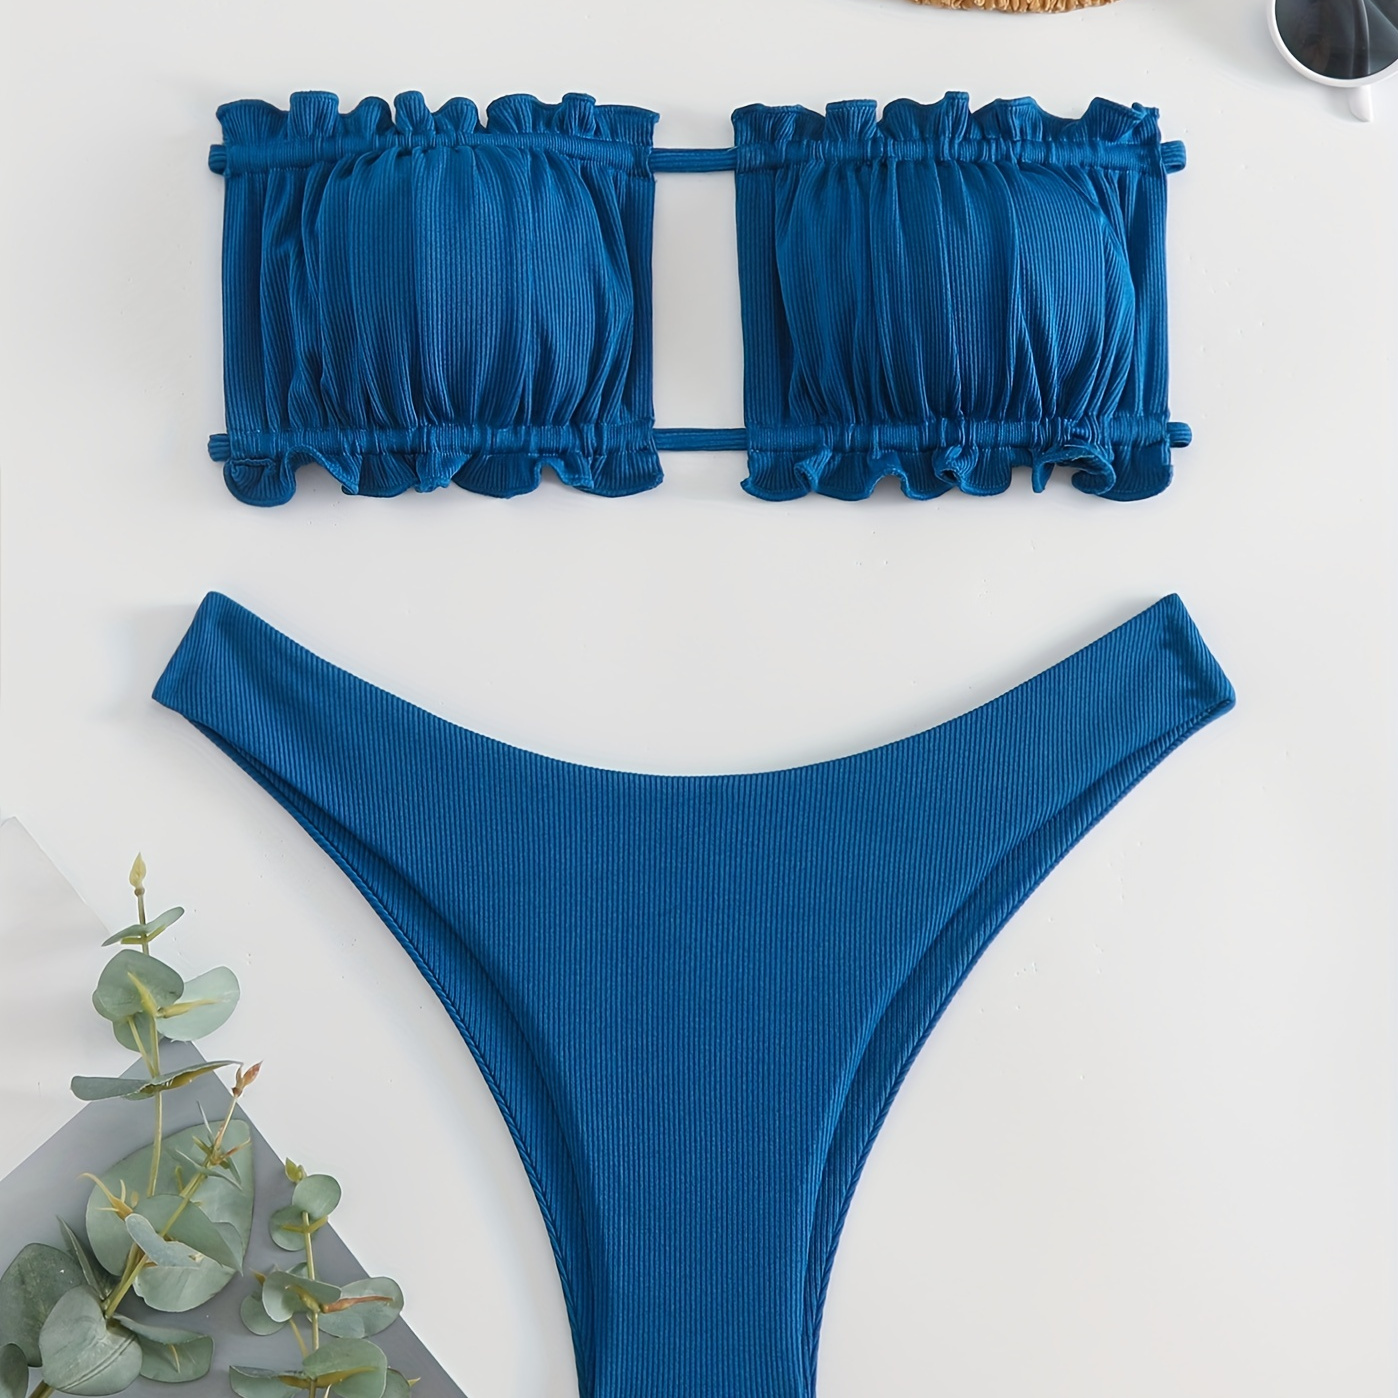 

Solid Color Rib Knit 2 Piece Set Bikini, Ruffle Hollow Out Tie Back Bandeau Stretchy Swimsuits, Women's Swimwear & Clothing